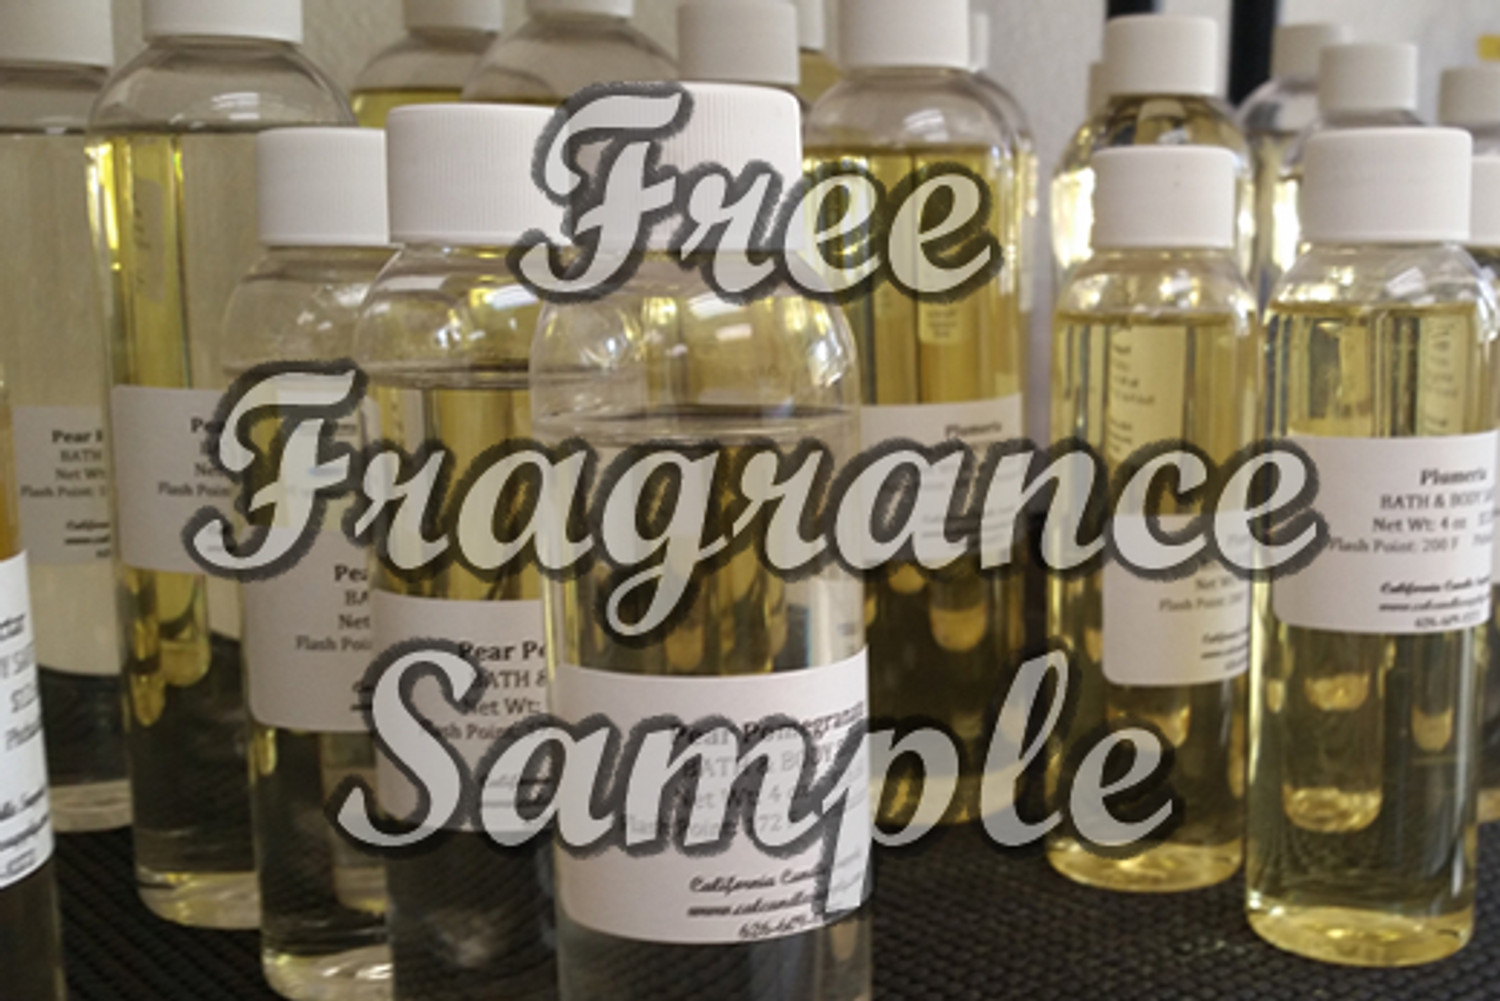 Free scented samples